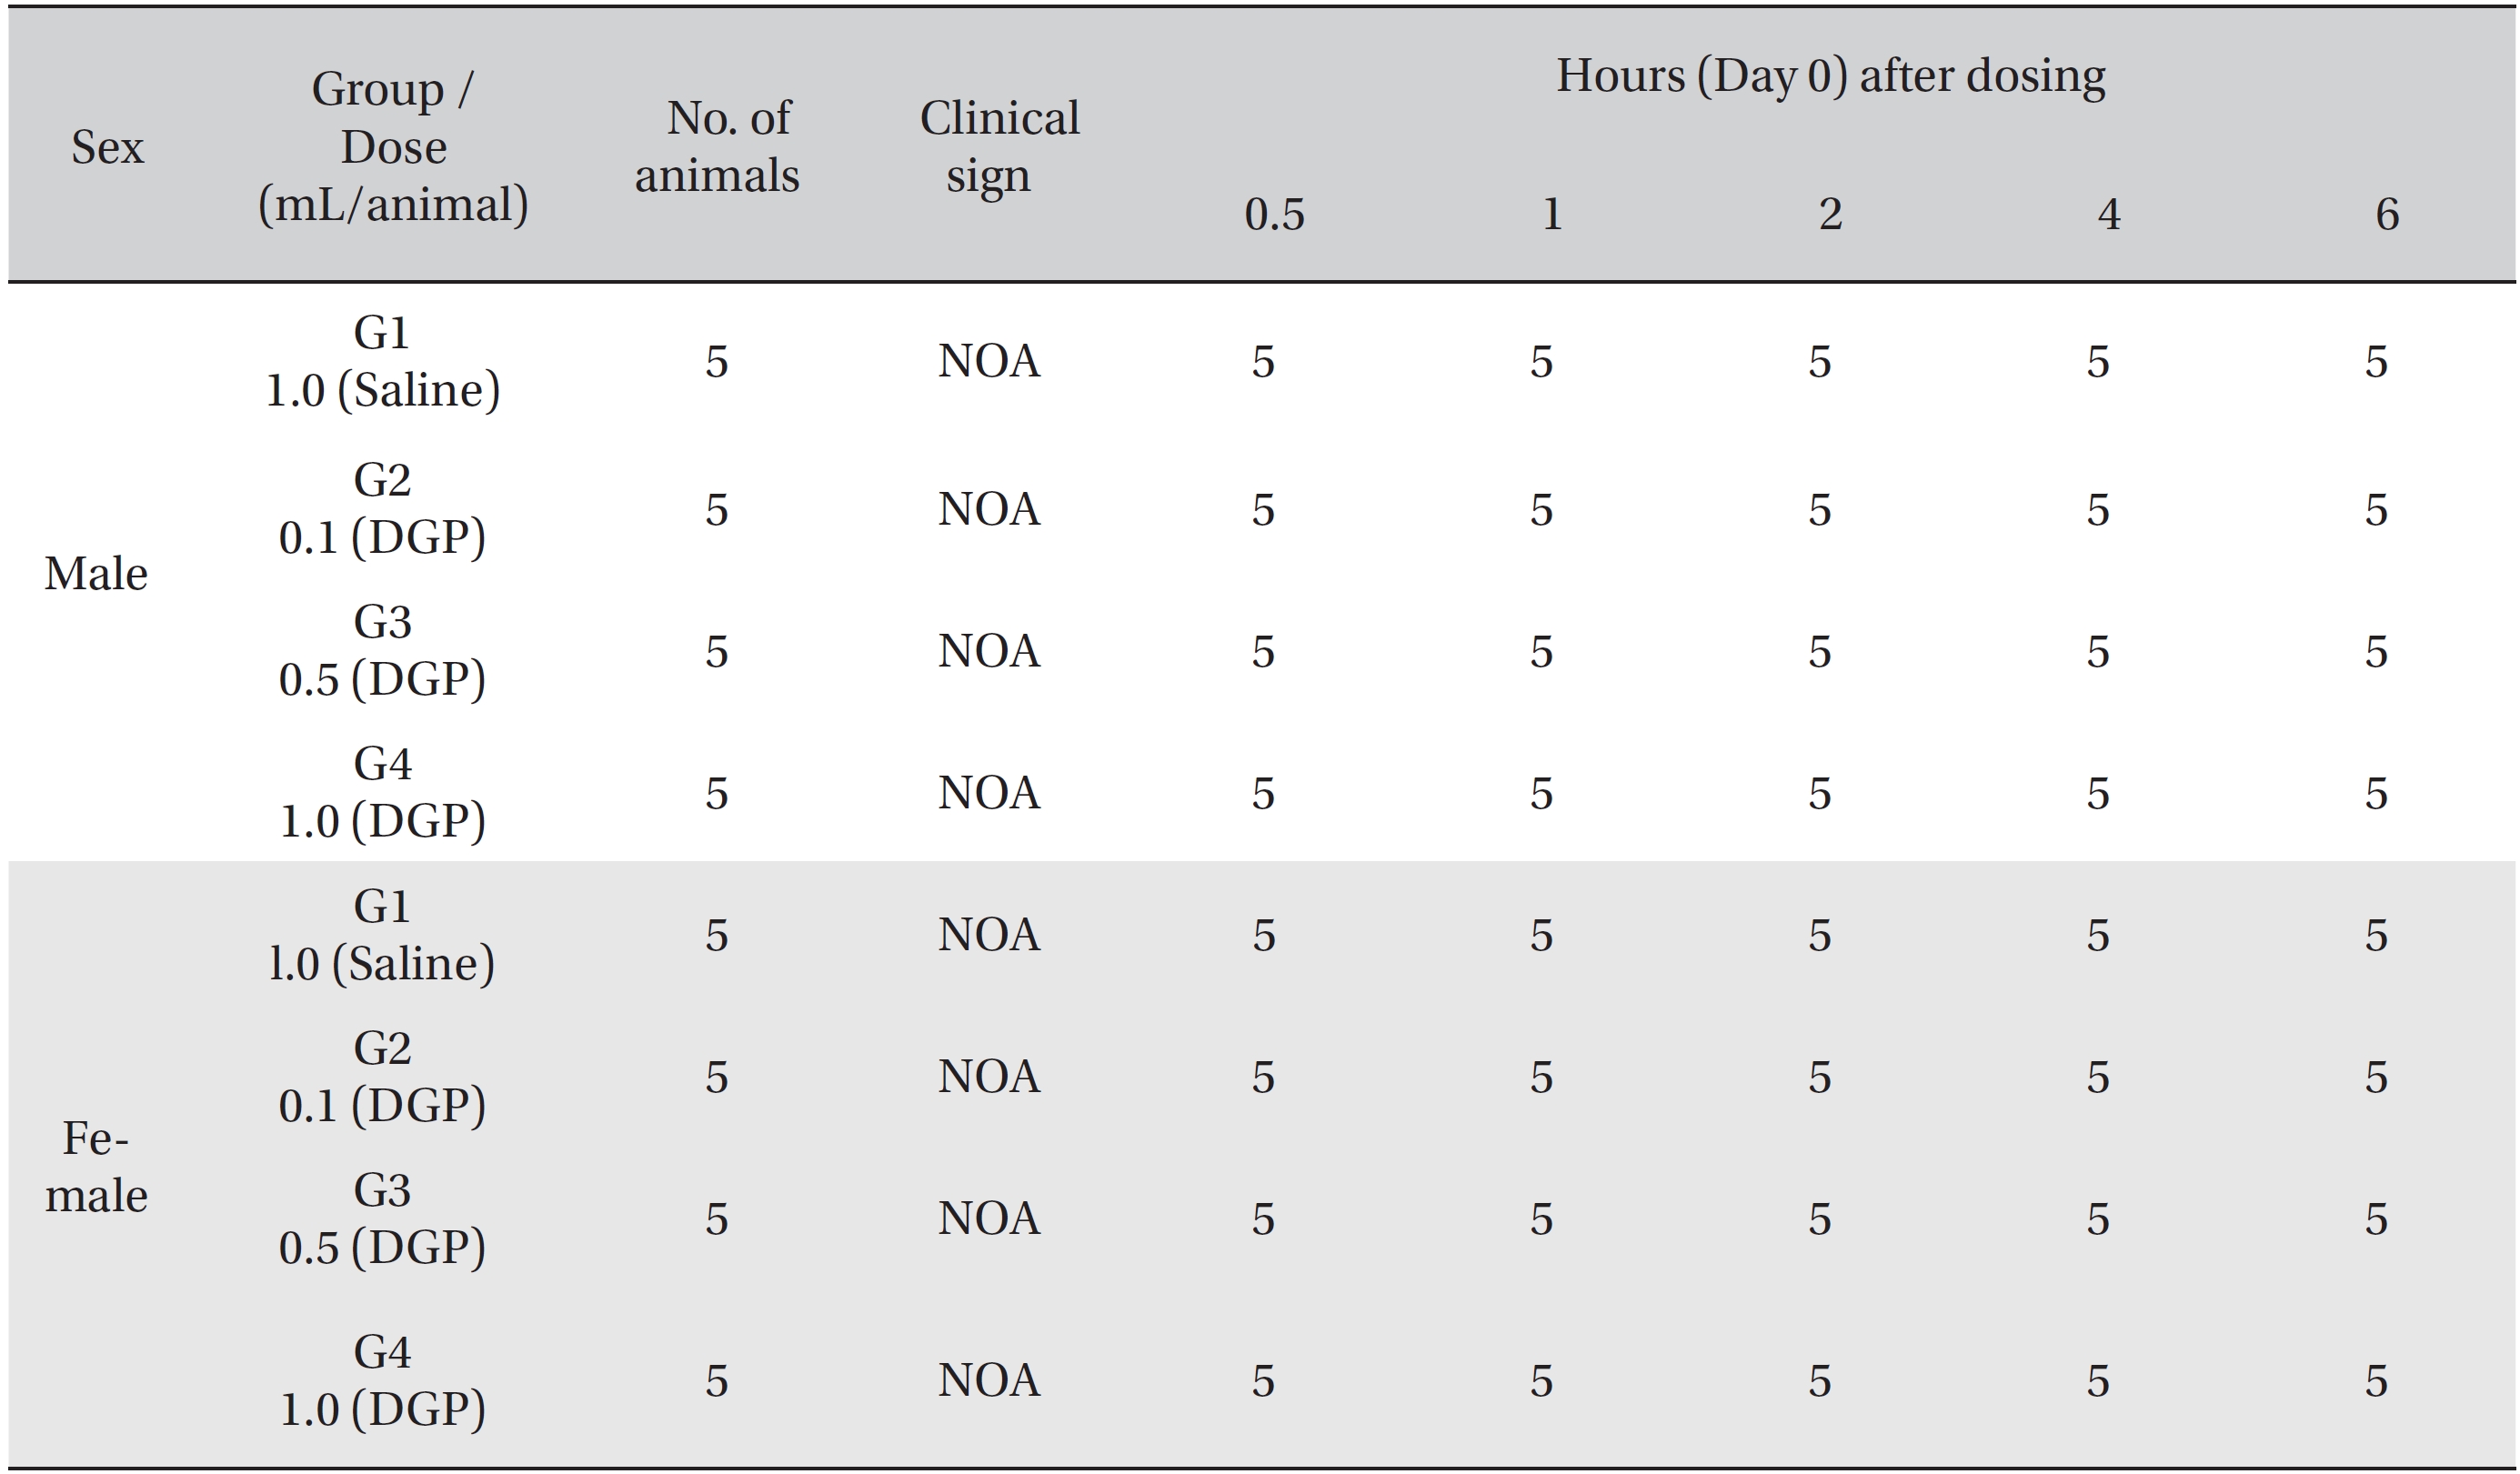 Summary of clinical signs by hour after dosing